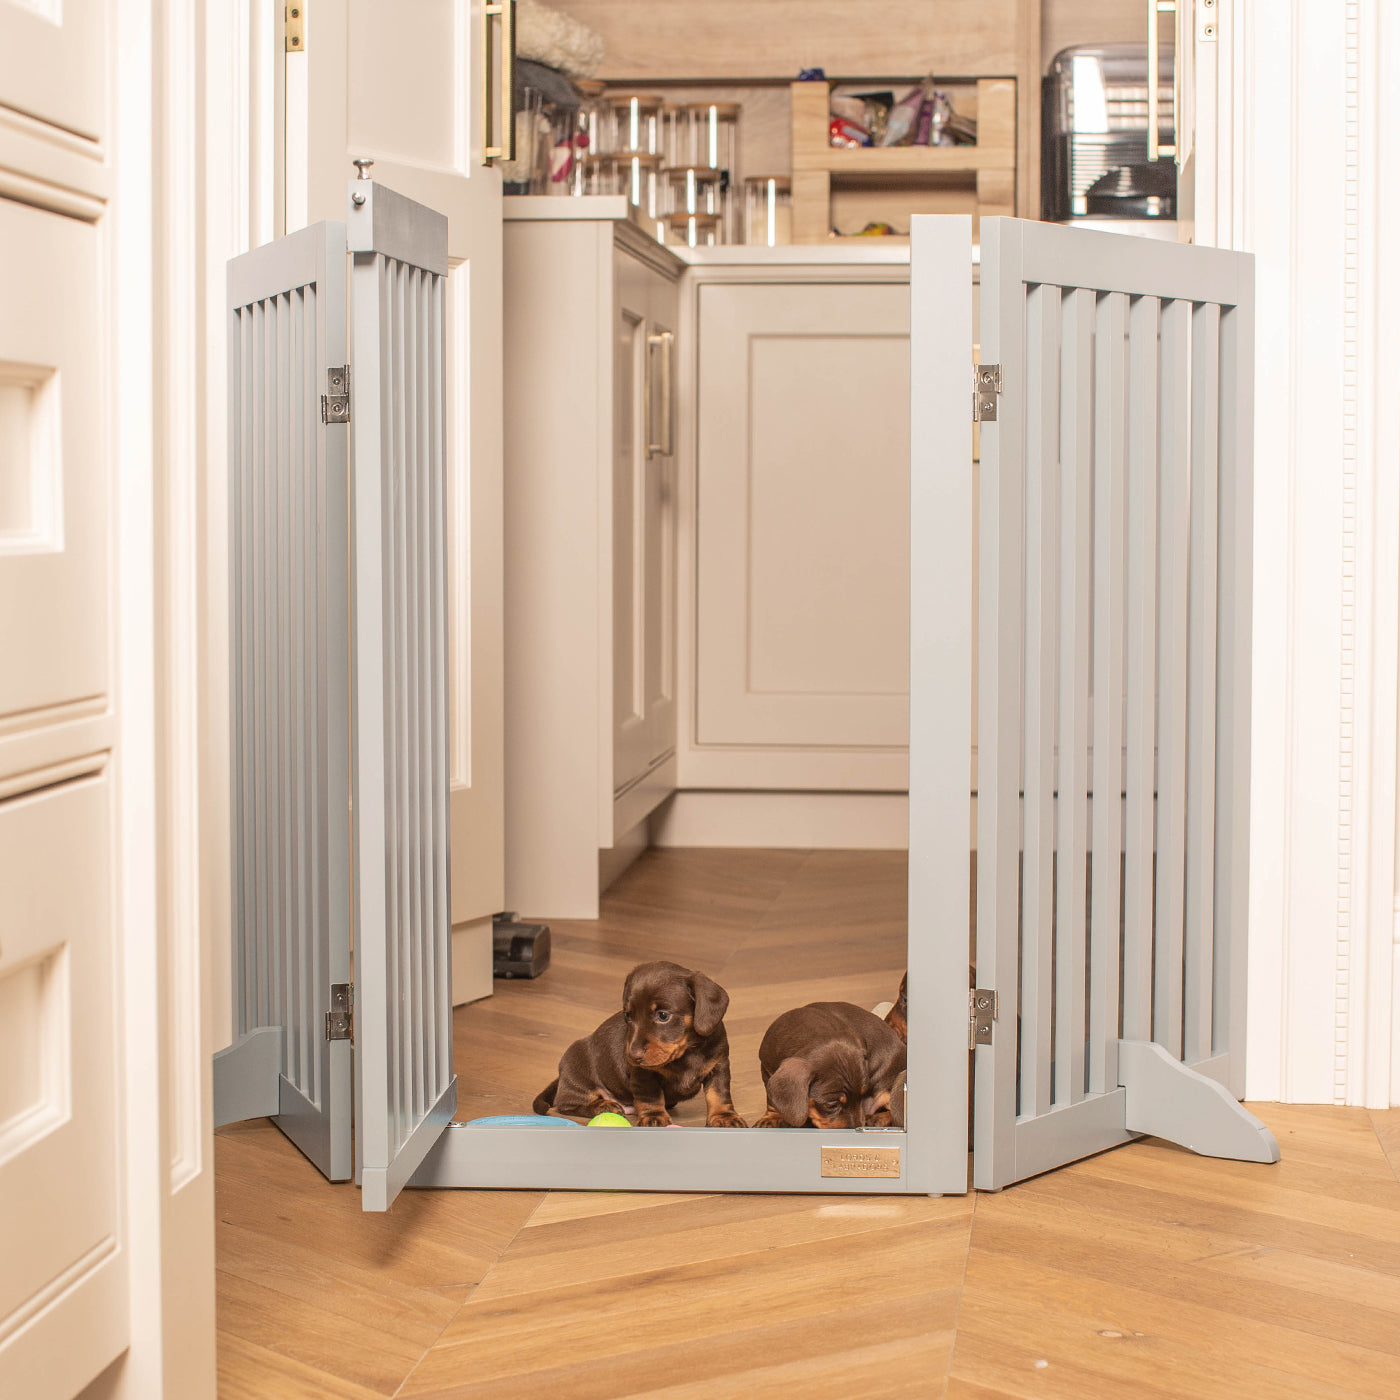 Train your new puppy with the perfect pet furniture, our super-strong wooden dog gate will ensure you set the boundaries for your furry friend, made easy to assemble featuring a walk-through gate for easy accessibility to be installed in doorways, hallways and stairs! Shop the ideal pet gate, available now in white & grey at Lords & Labradors US